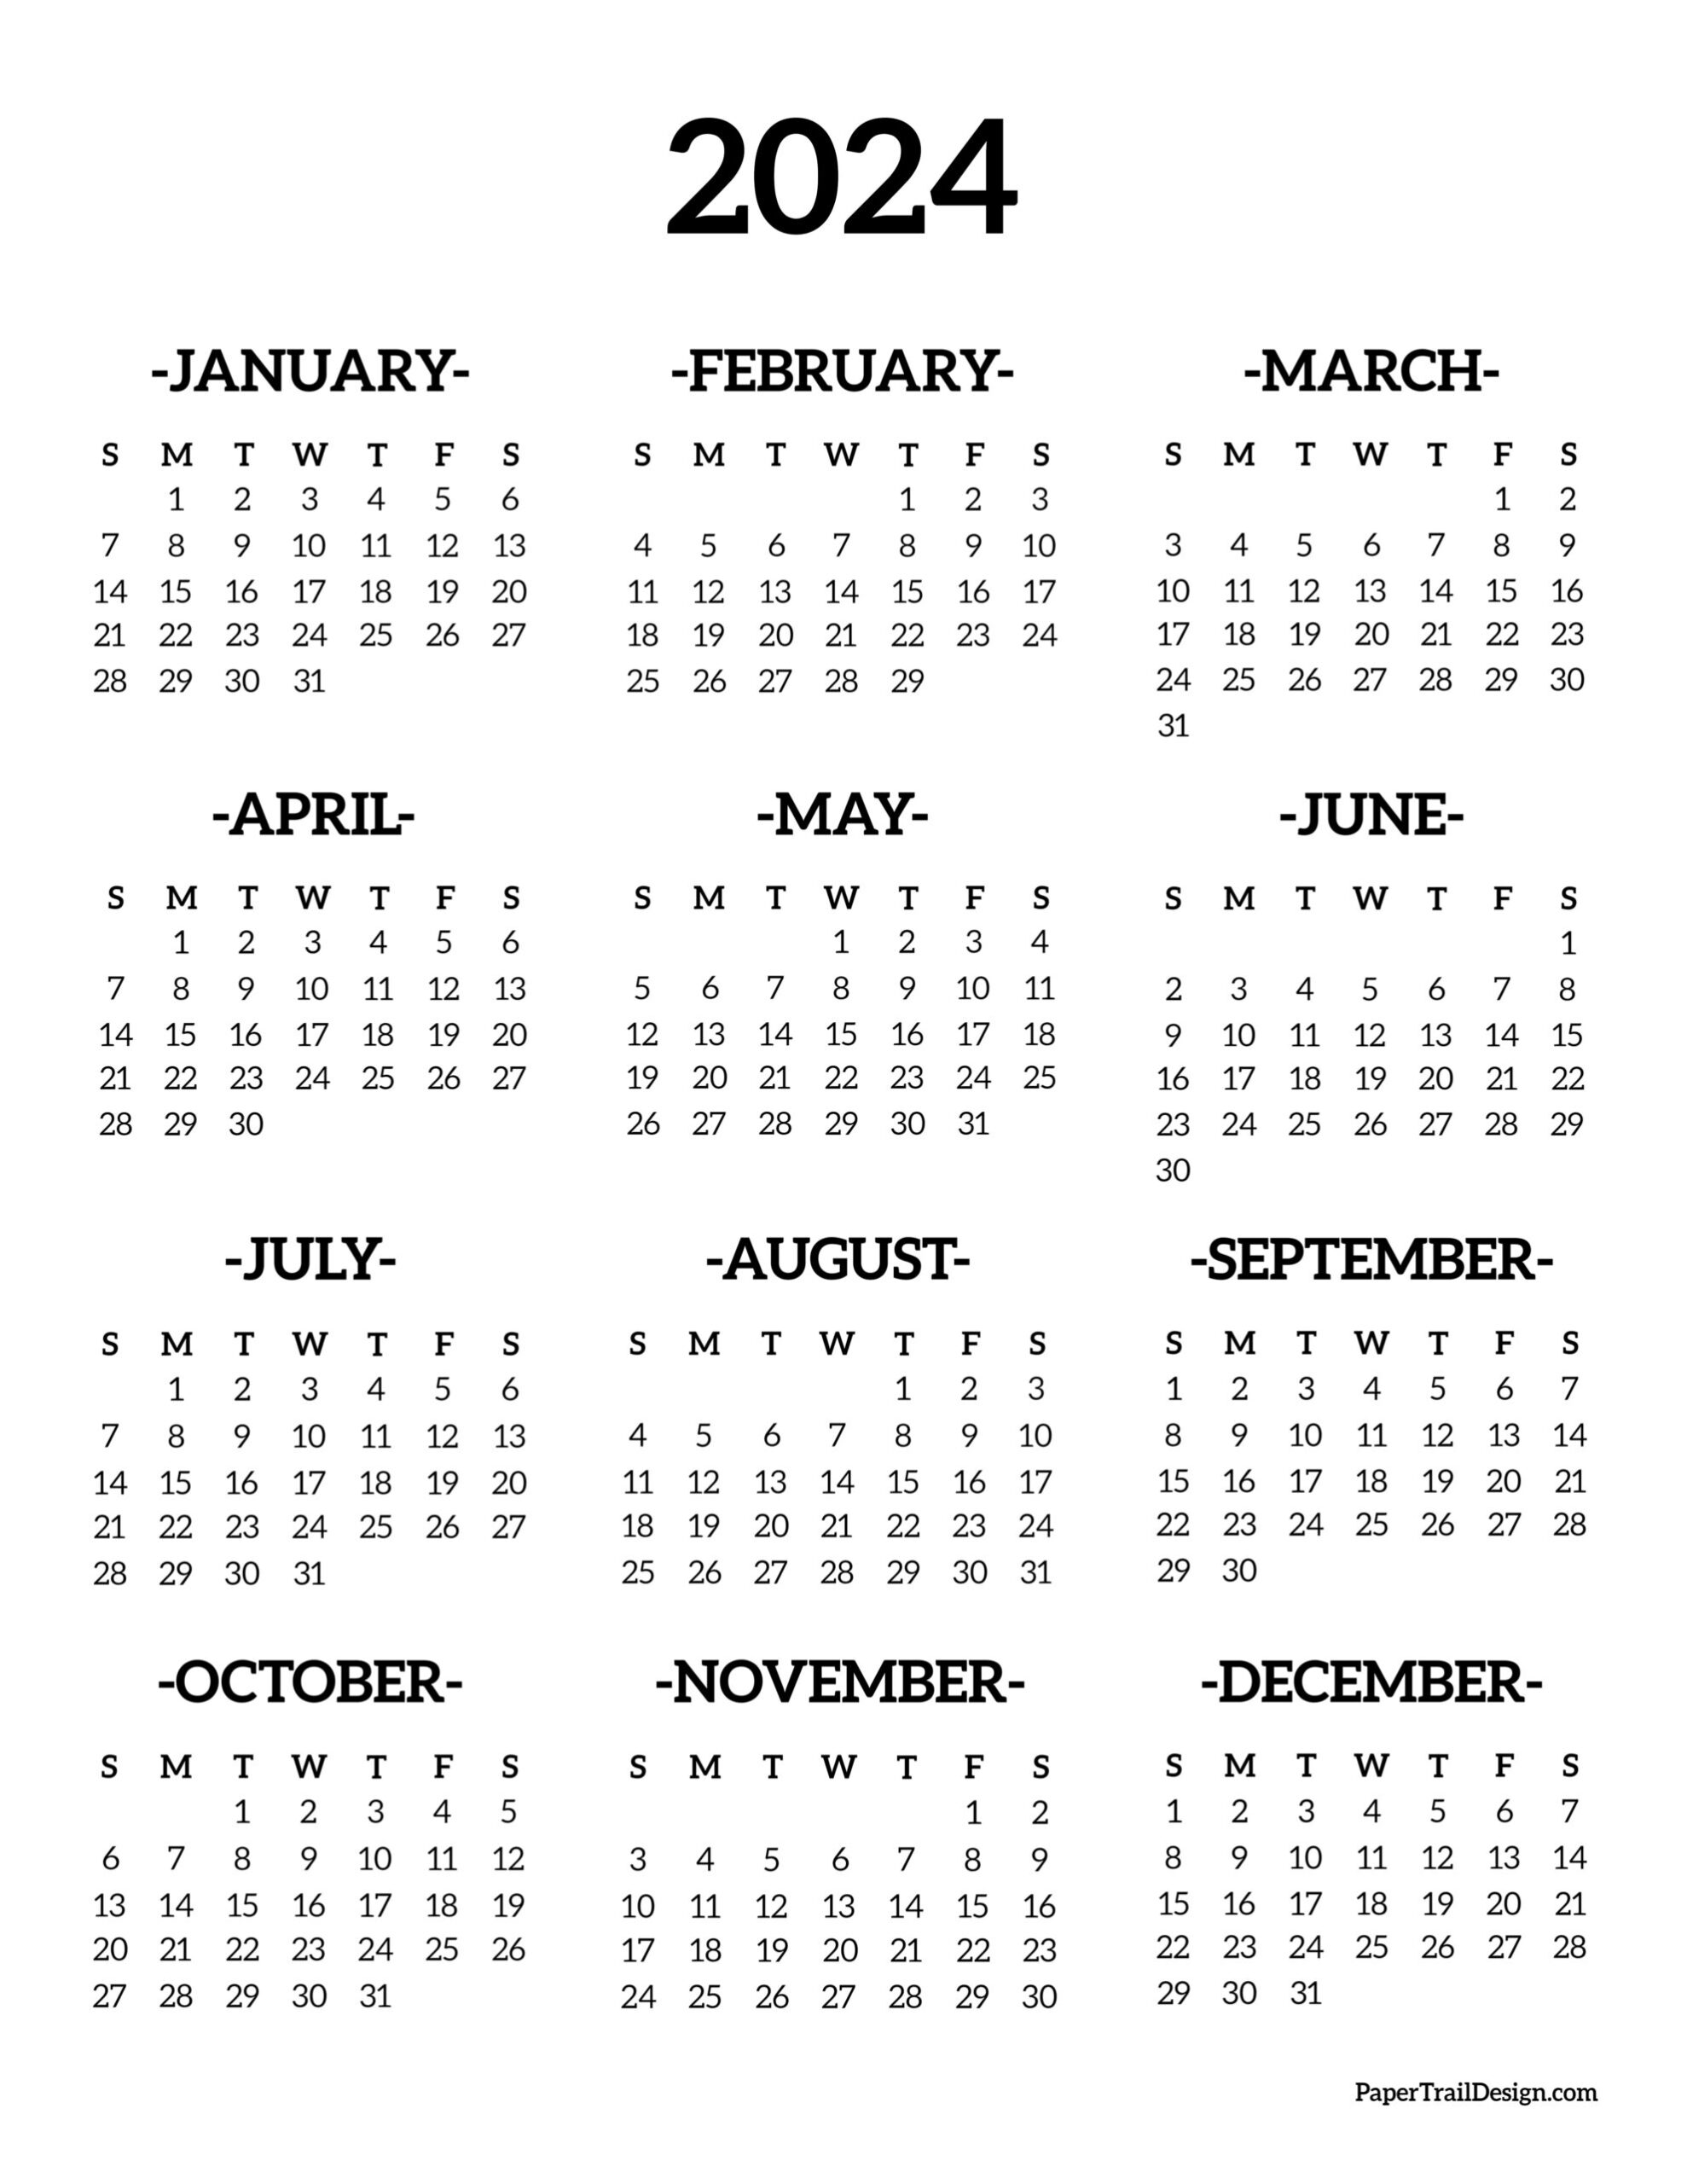 Calendar 2024 Printable One Page - Paper Trail Design for One Page Printable 2024 Calendar